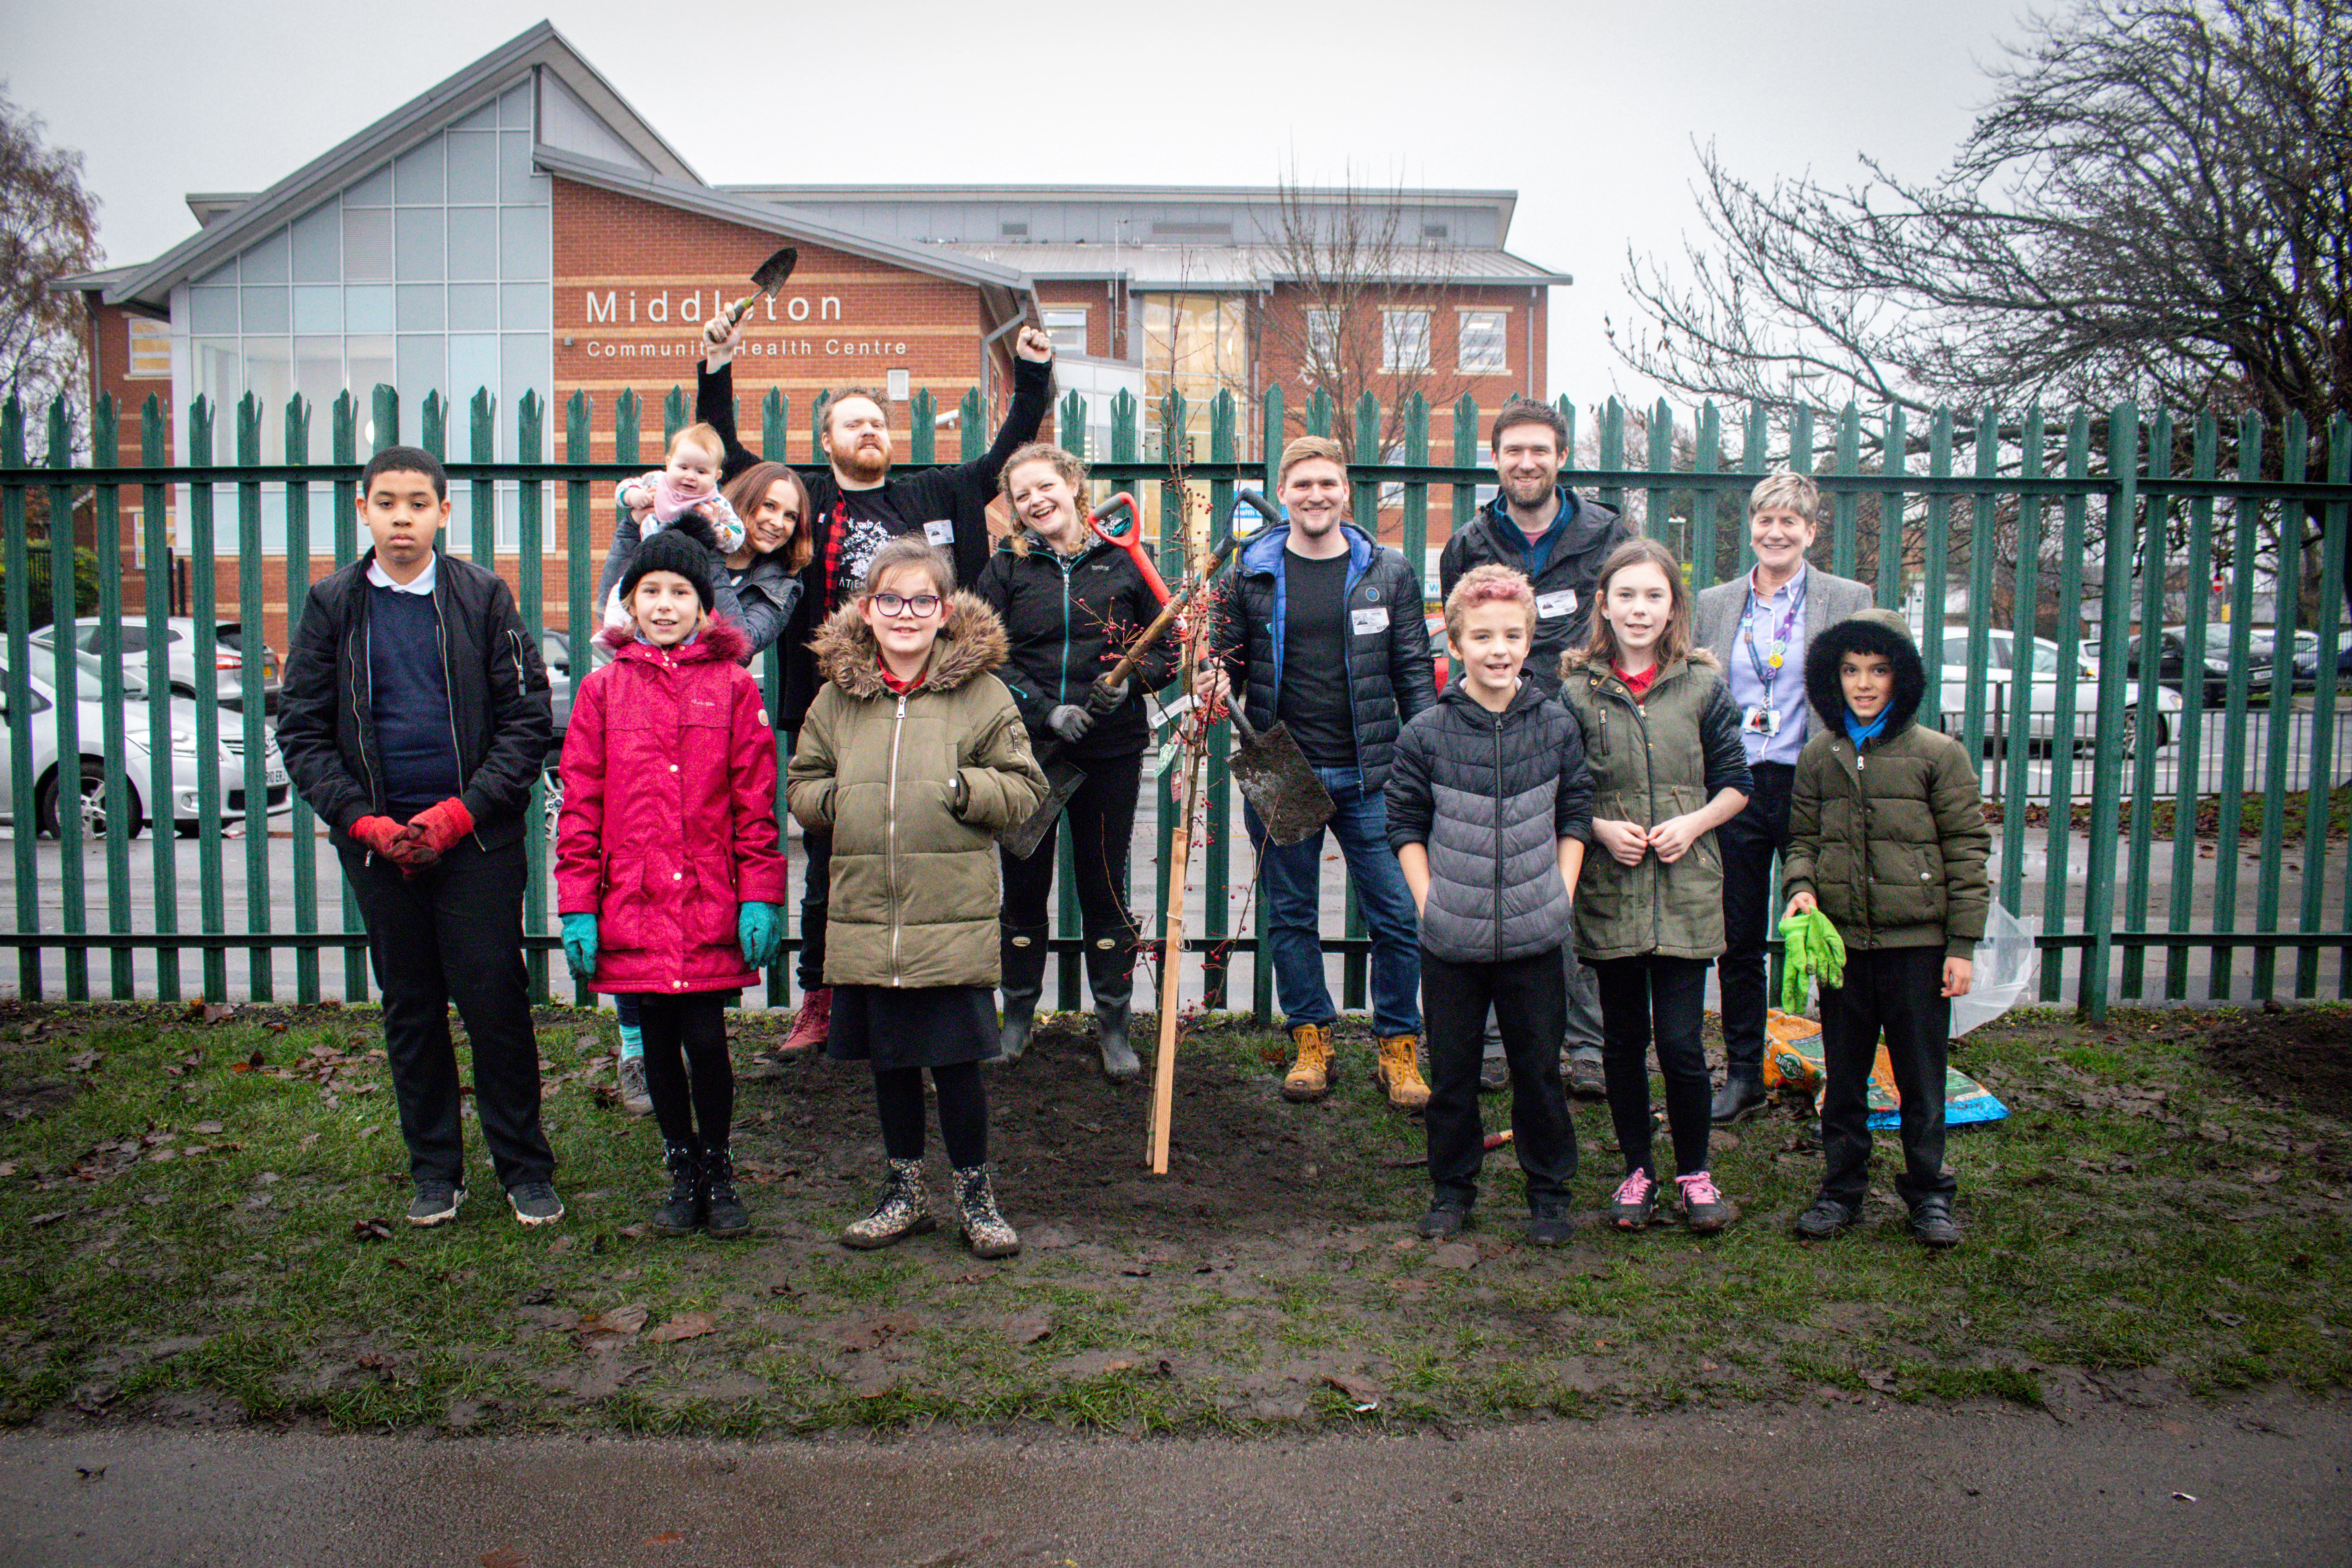 Splitpixel Creative team and Middleton Primary students with their newly planted tree #EveryTreeCounts